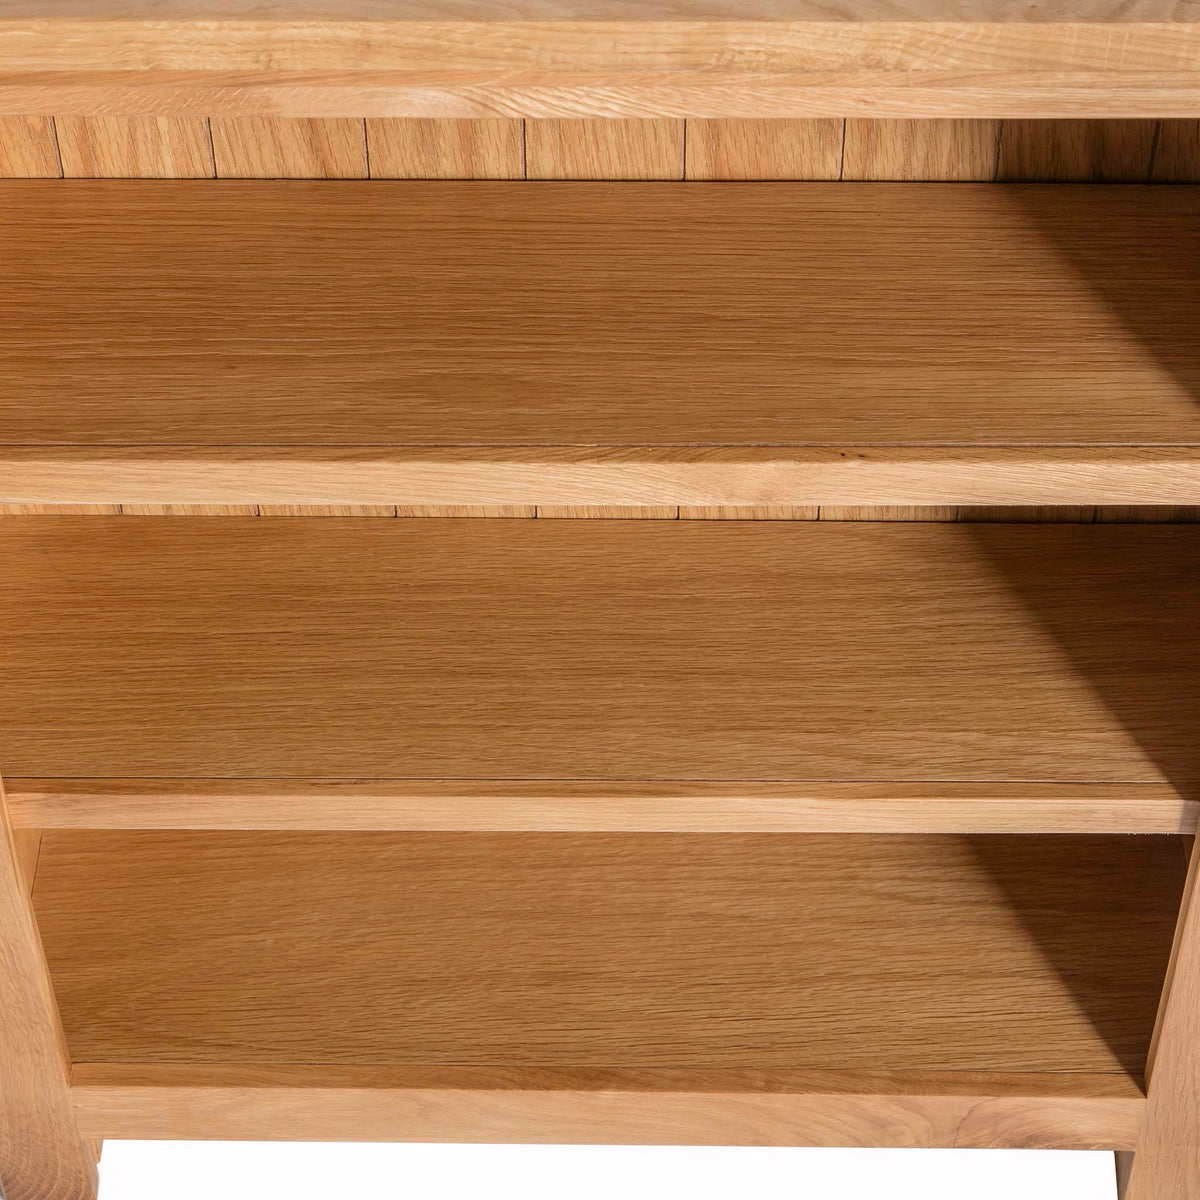 London Oak Small Bookcase - Close up of shelves looking down on them